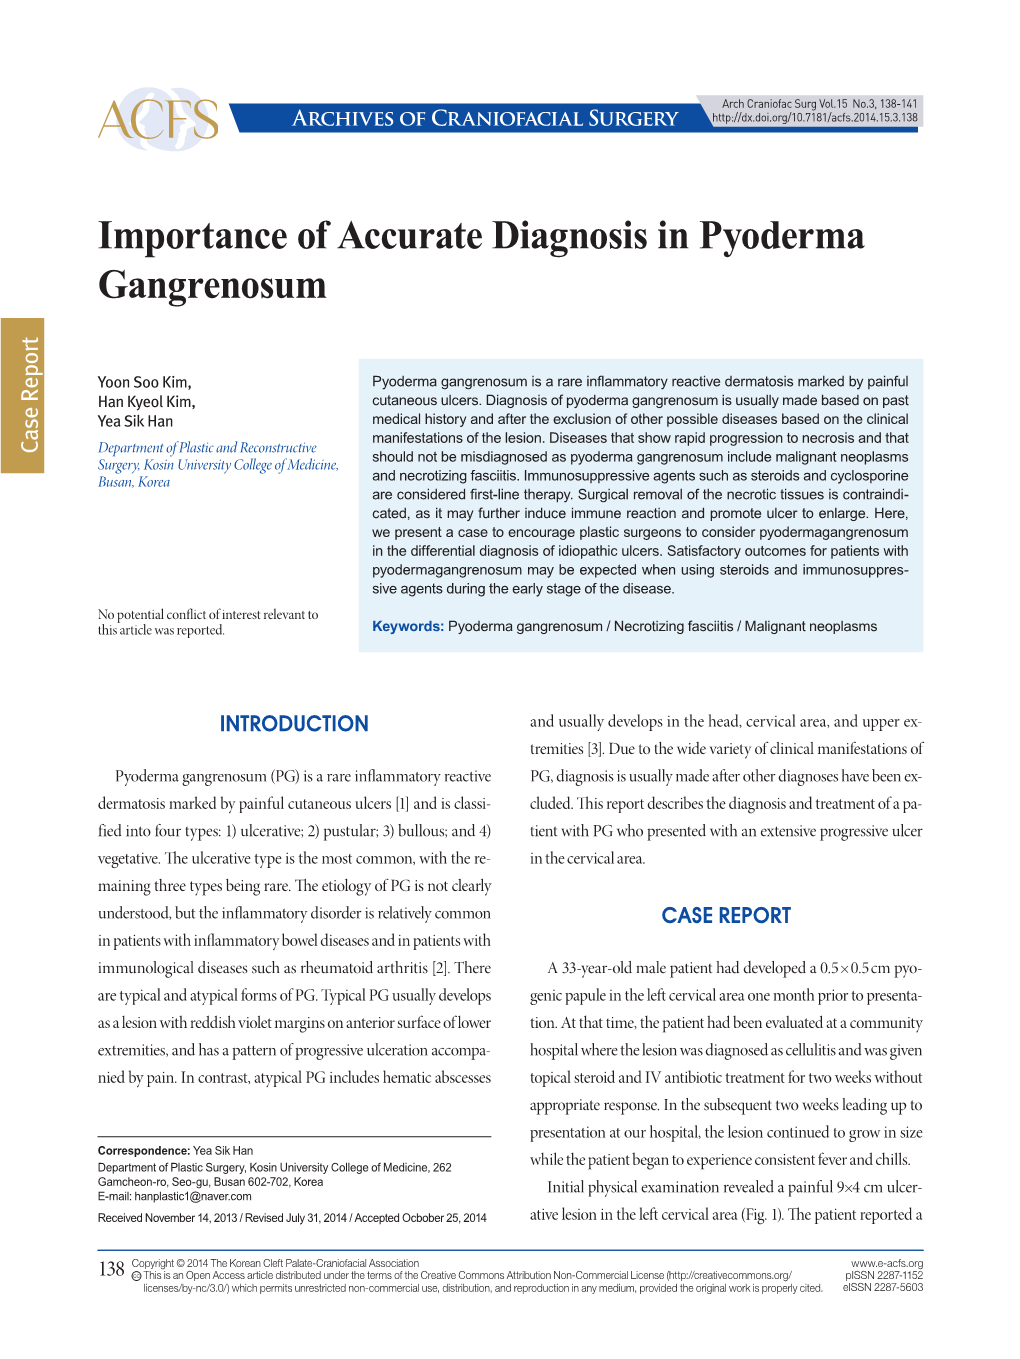 Importance of Accurate Diagnosis in Pyoderma Gangrenosum